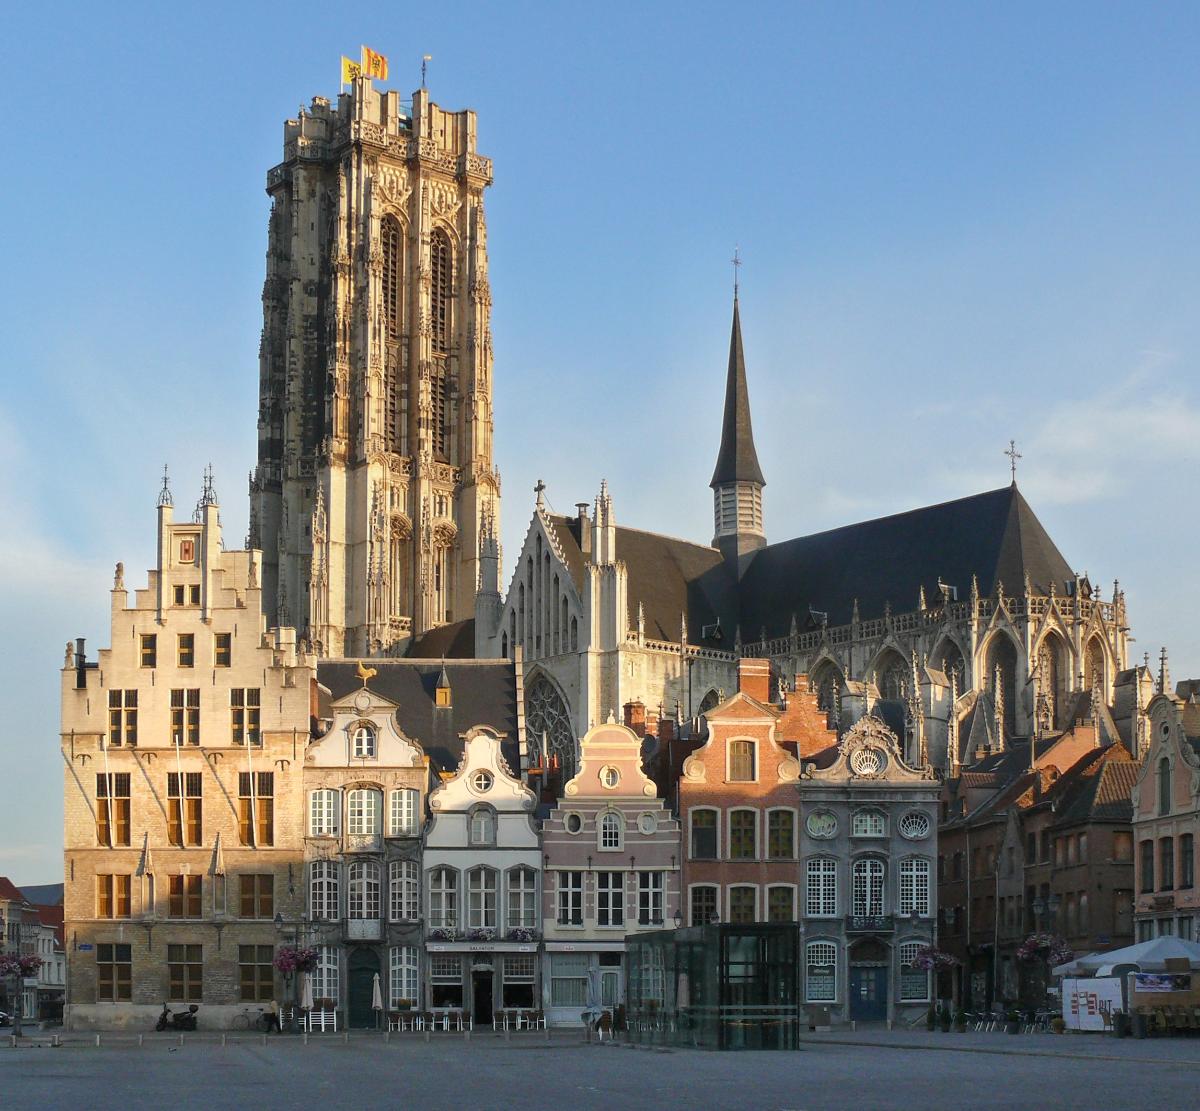 The Town Square of Mechelen with St-Rumbold's Cathedral in the background The flat-topped silhouette of the St-Rumbold’s Cathedral’s tower is easily recognizable and dominates the surroundings.